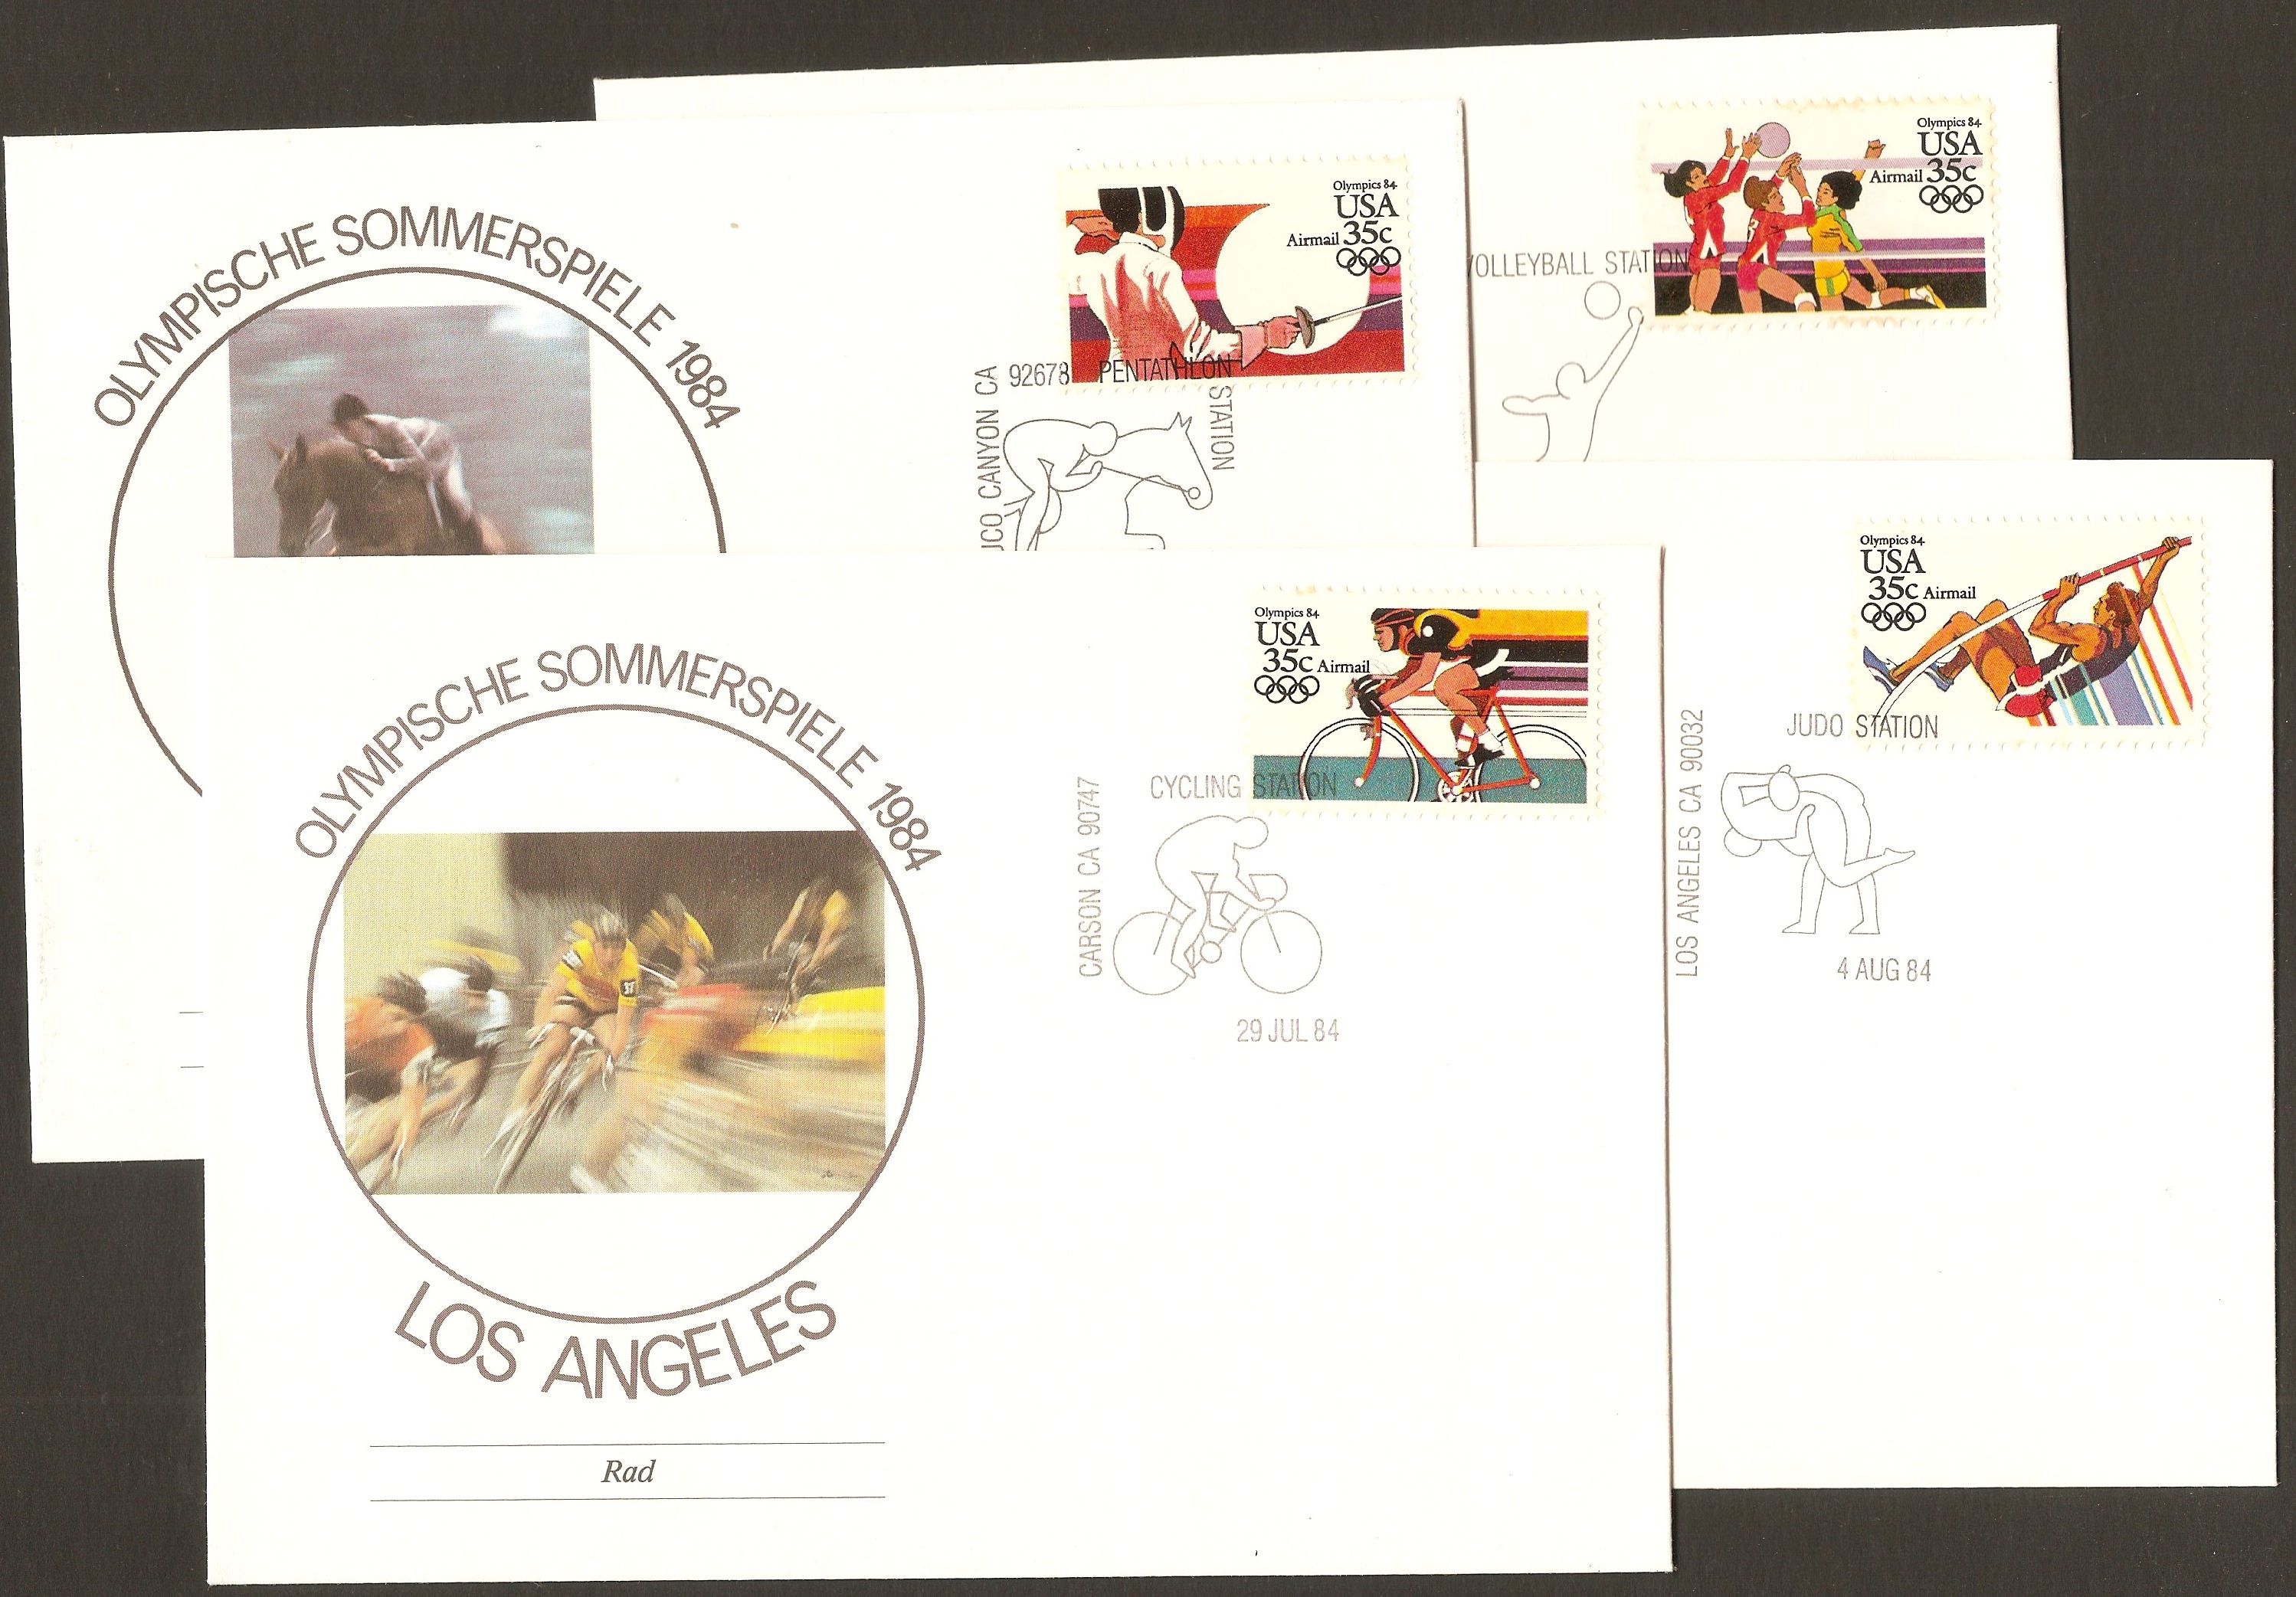 United States 1983 Los Angeles Olympics Souvenir Covers.